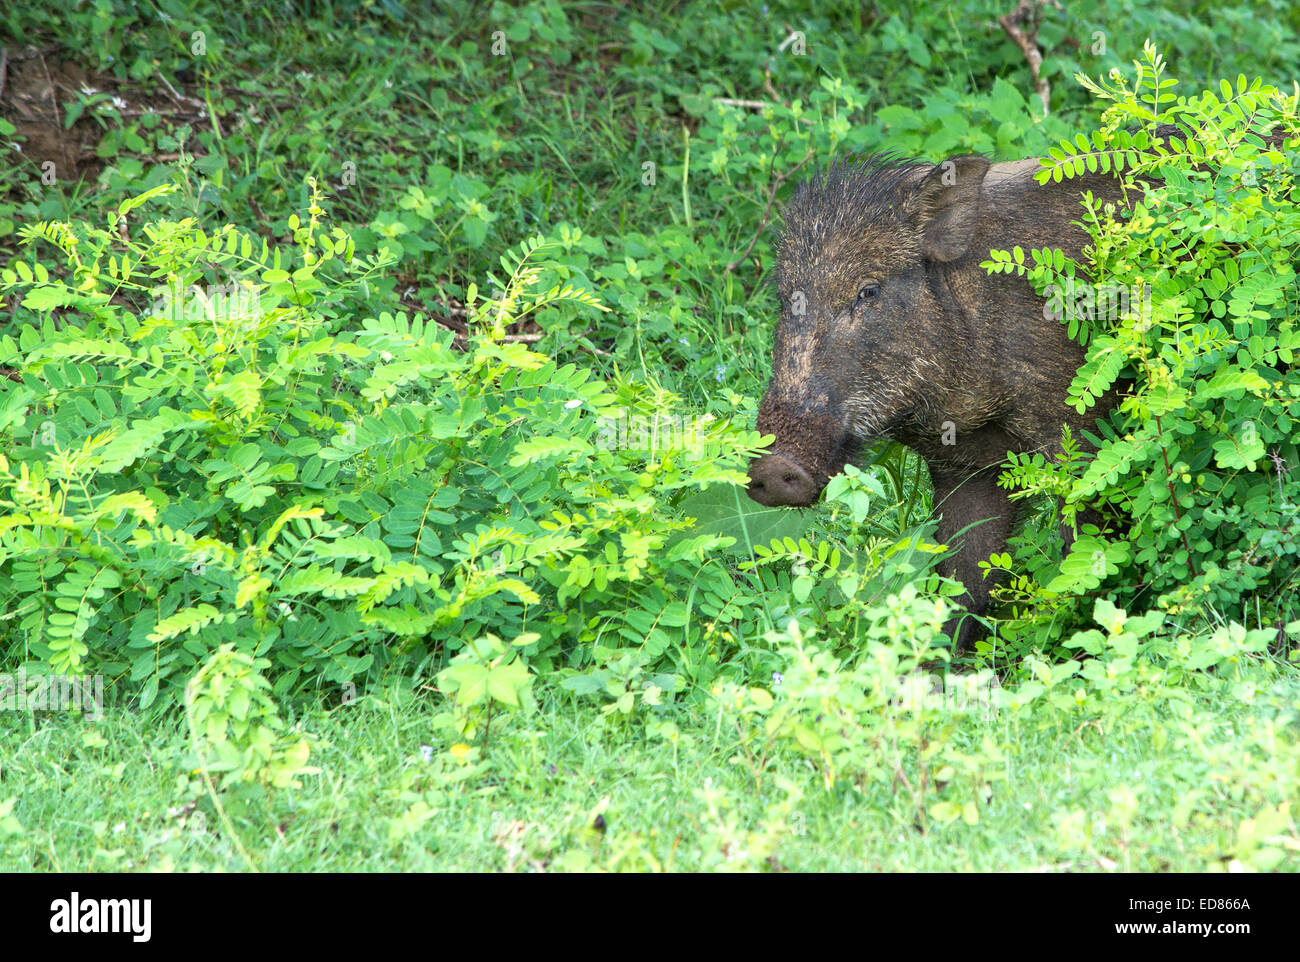 Wild boar with a cute and curious look is peeping out from behind a bush in Yala National Park, Southern Province, Sri Lanka. Stock Photo